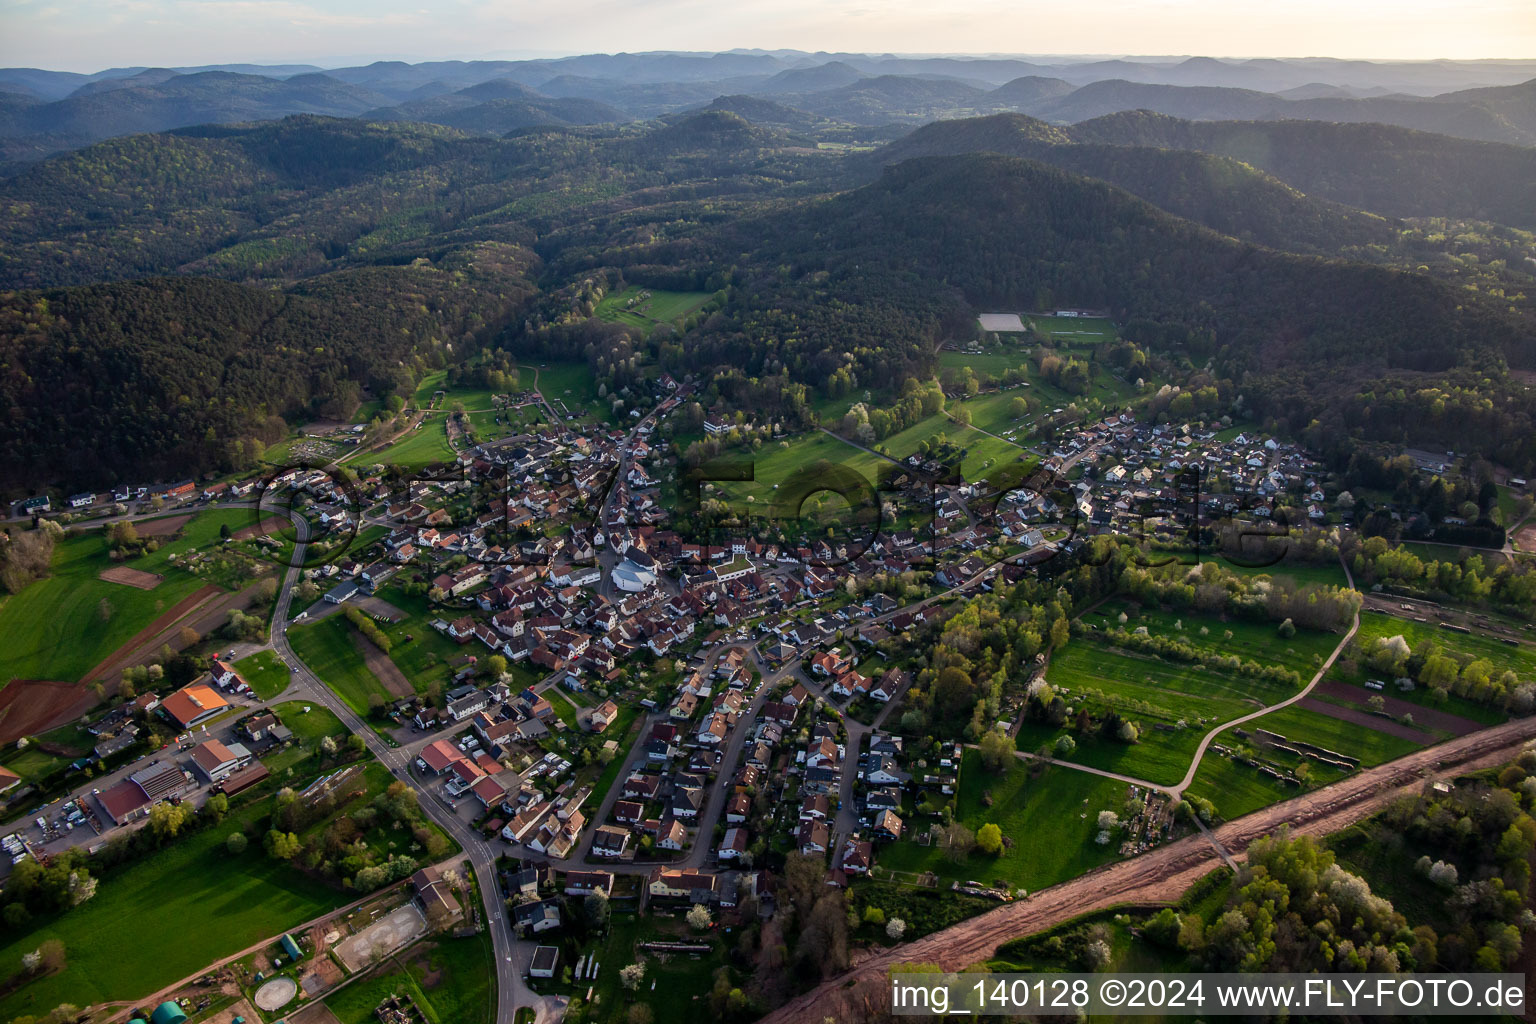 District Gossersweiler in Gossersweiler-Stein in the state Rhineland-Palatinate, Germany from the drone perspective